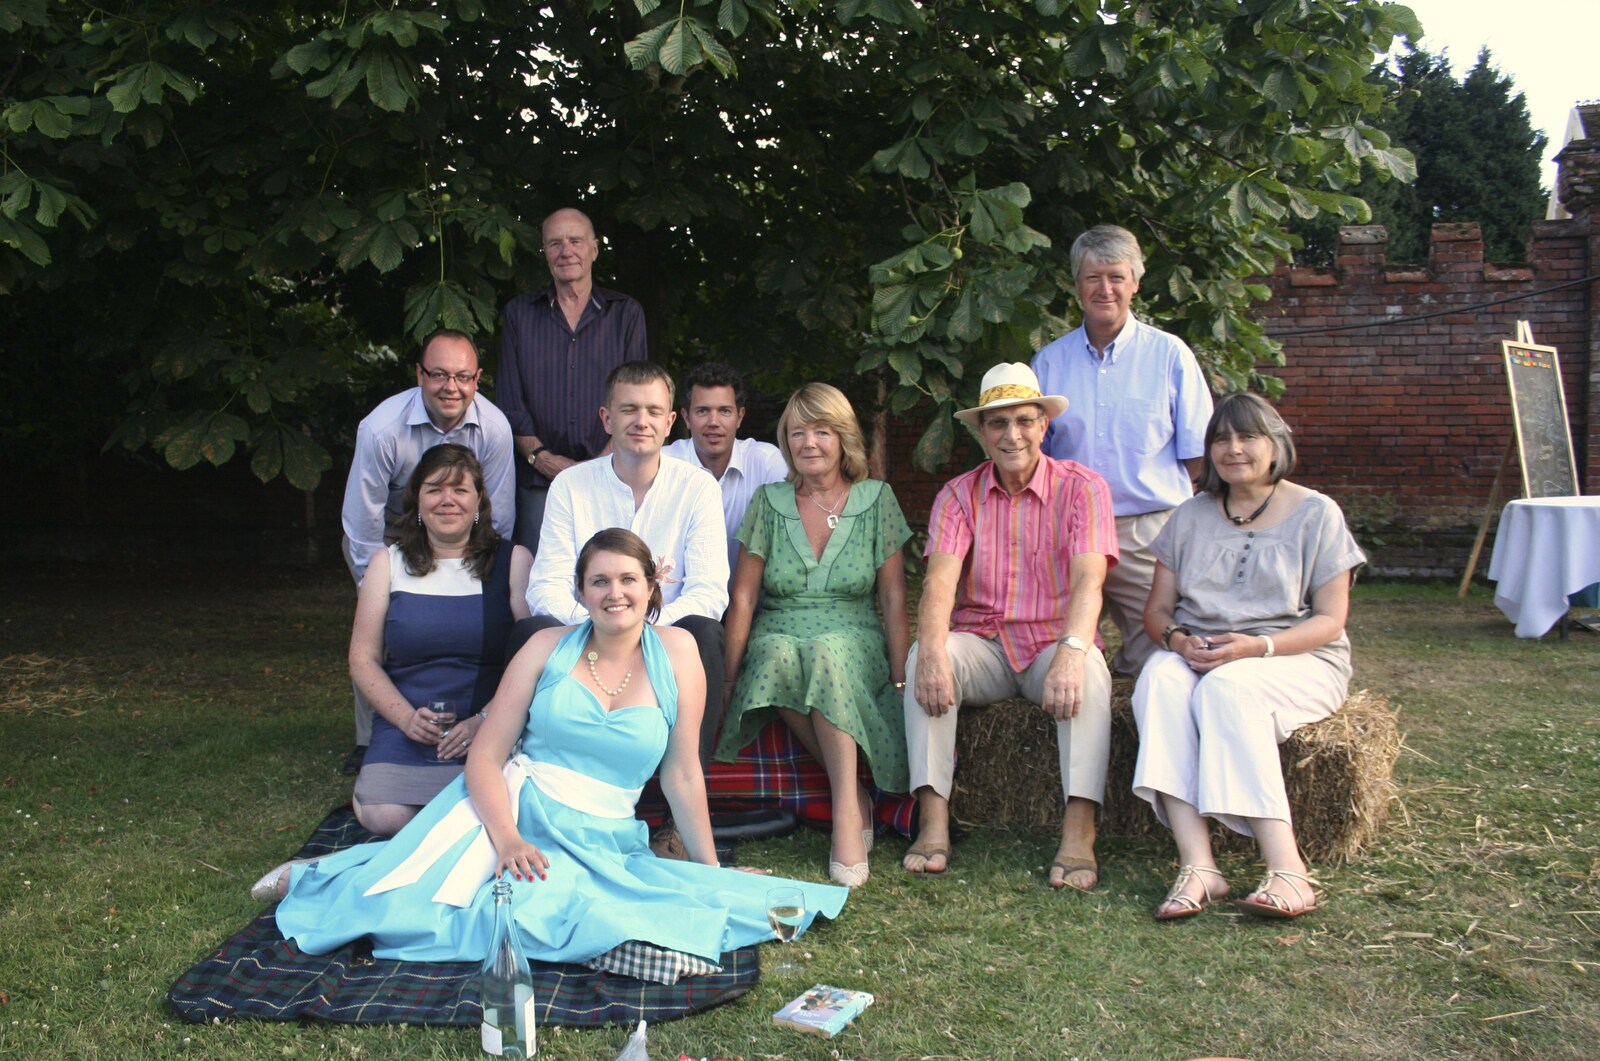 Nosher's family photo from Nosher and Isobel's Wedding, Brome, Suffolk - 3rd July 2010